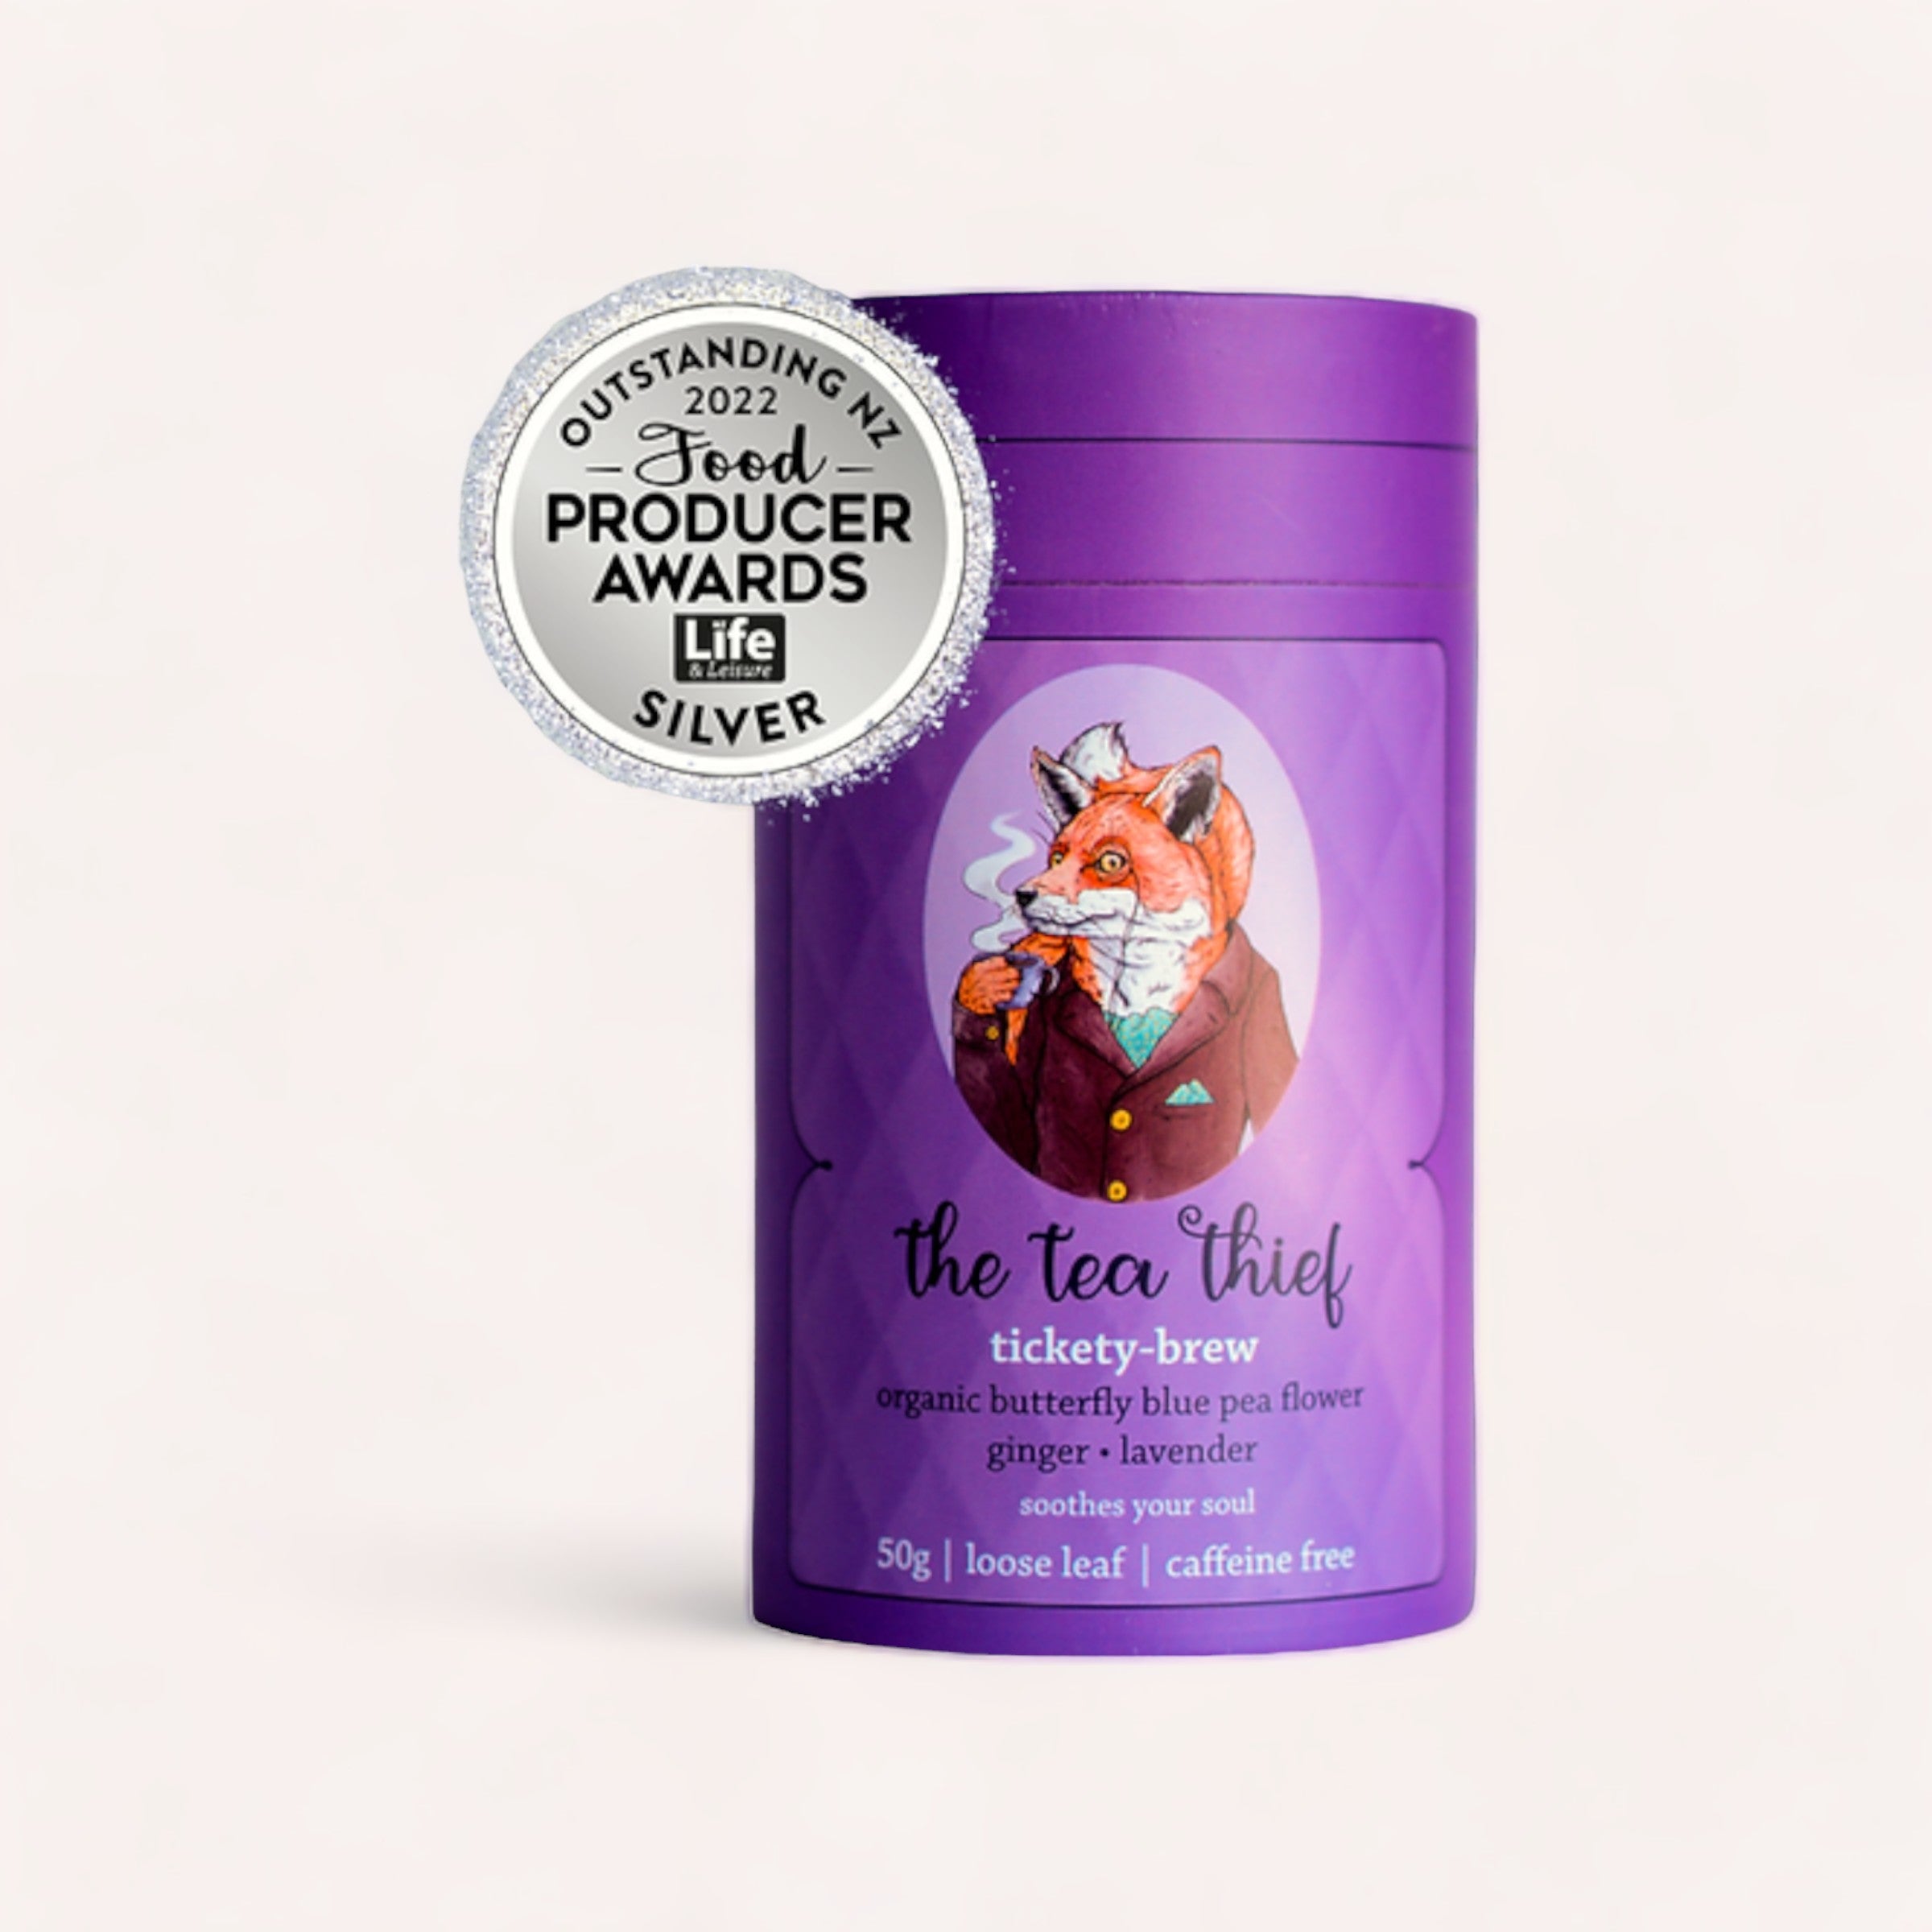 A vibrant purple container of "Tickety Brew 50g by The Tea Thief" organic butterfly blue pea flower ginger-lavender tea, winner of the 2022 Good Producer Awards Silver Life, in a